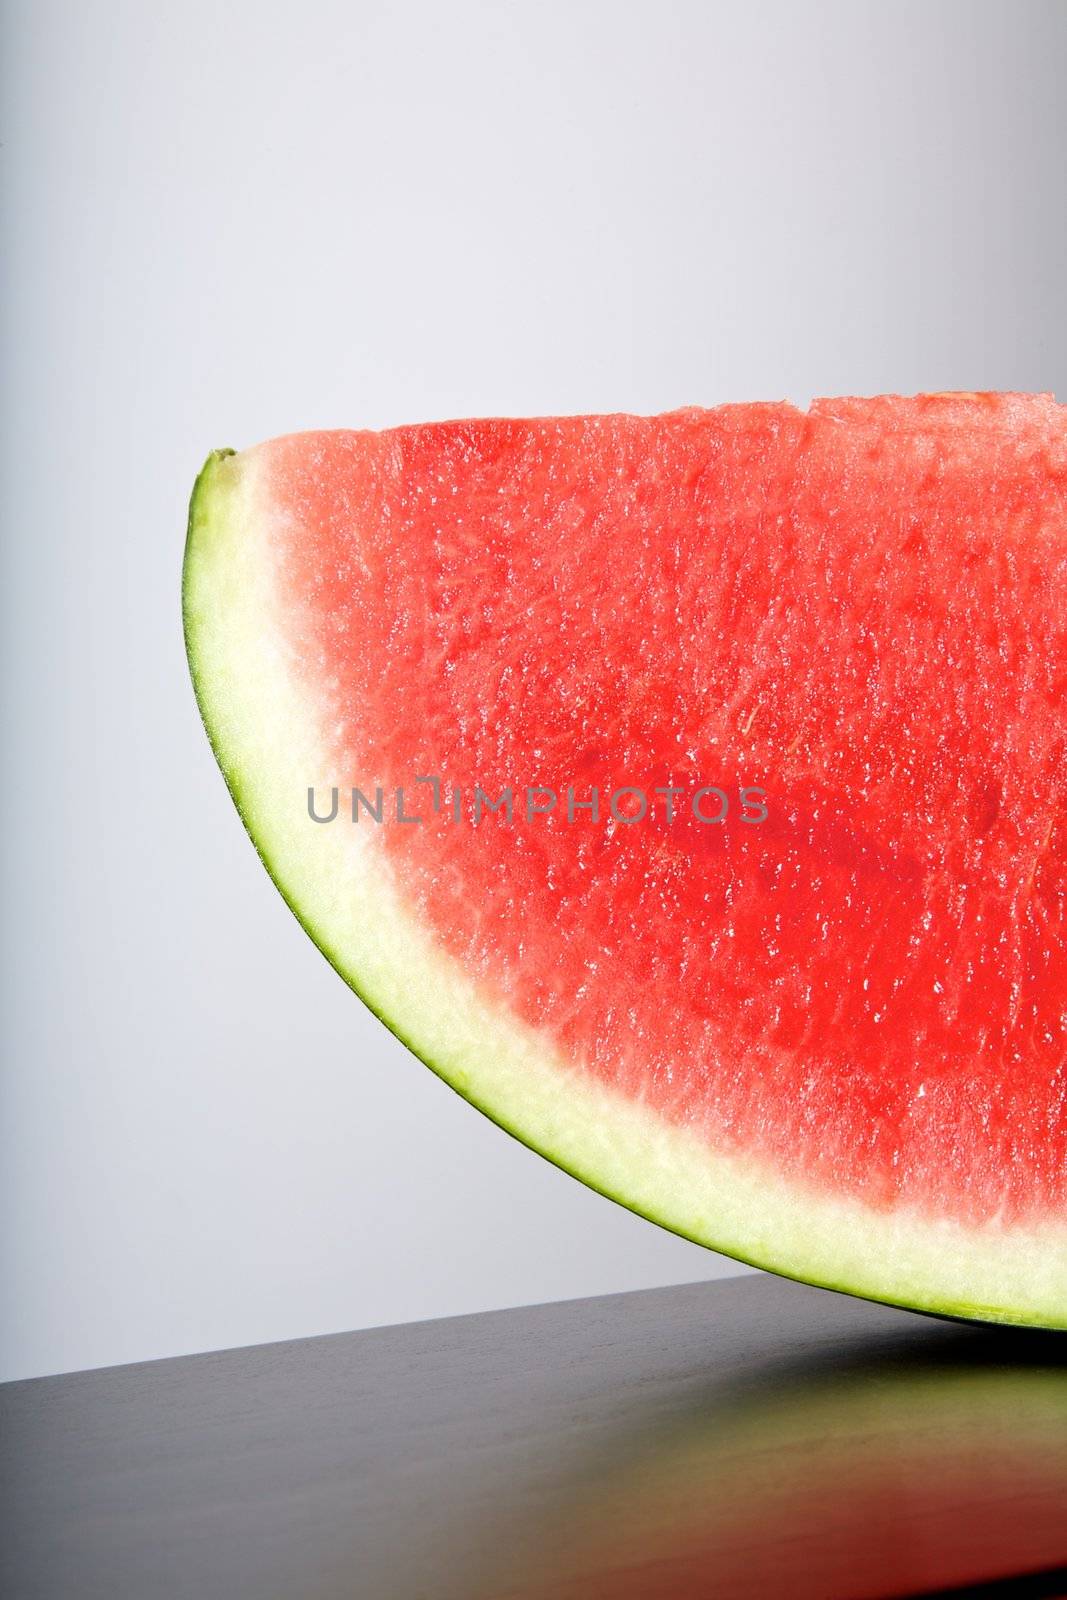 still life watermelon on wood table and white background